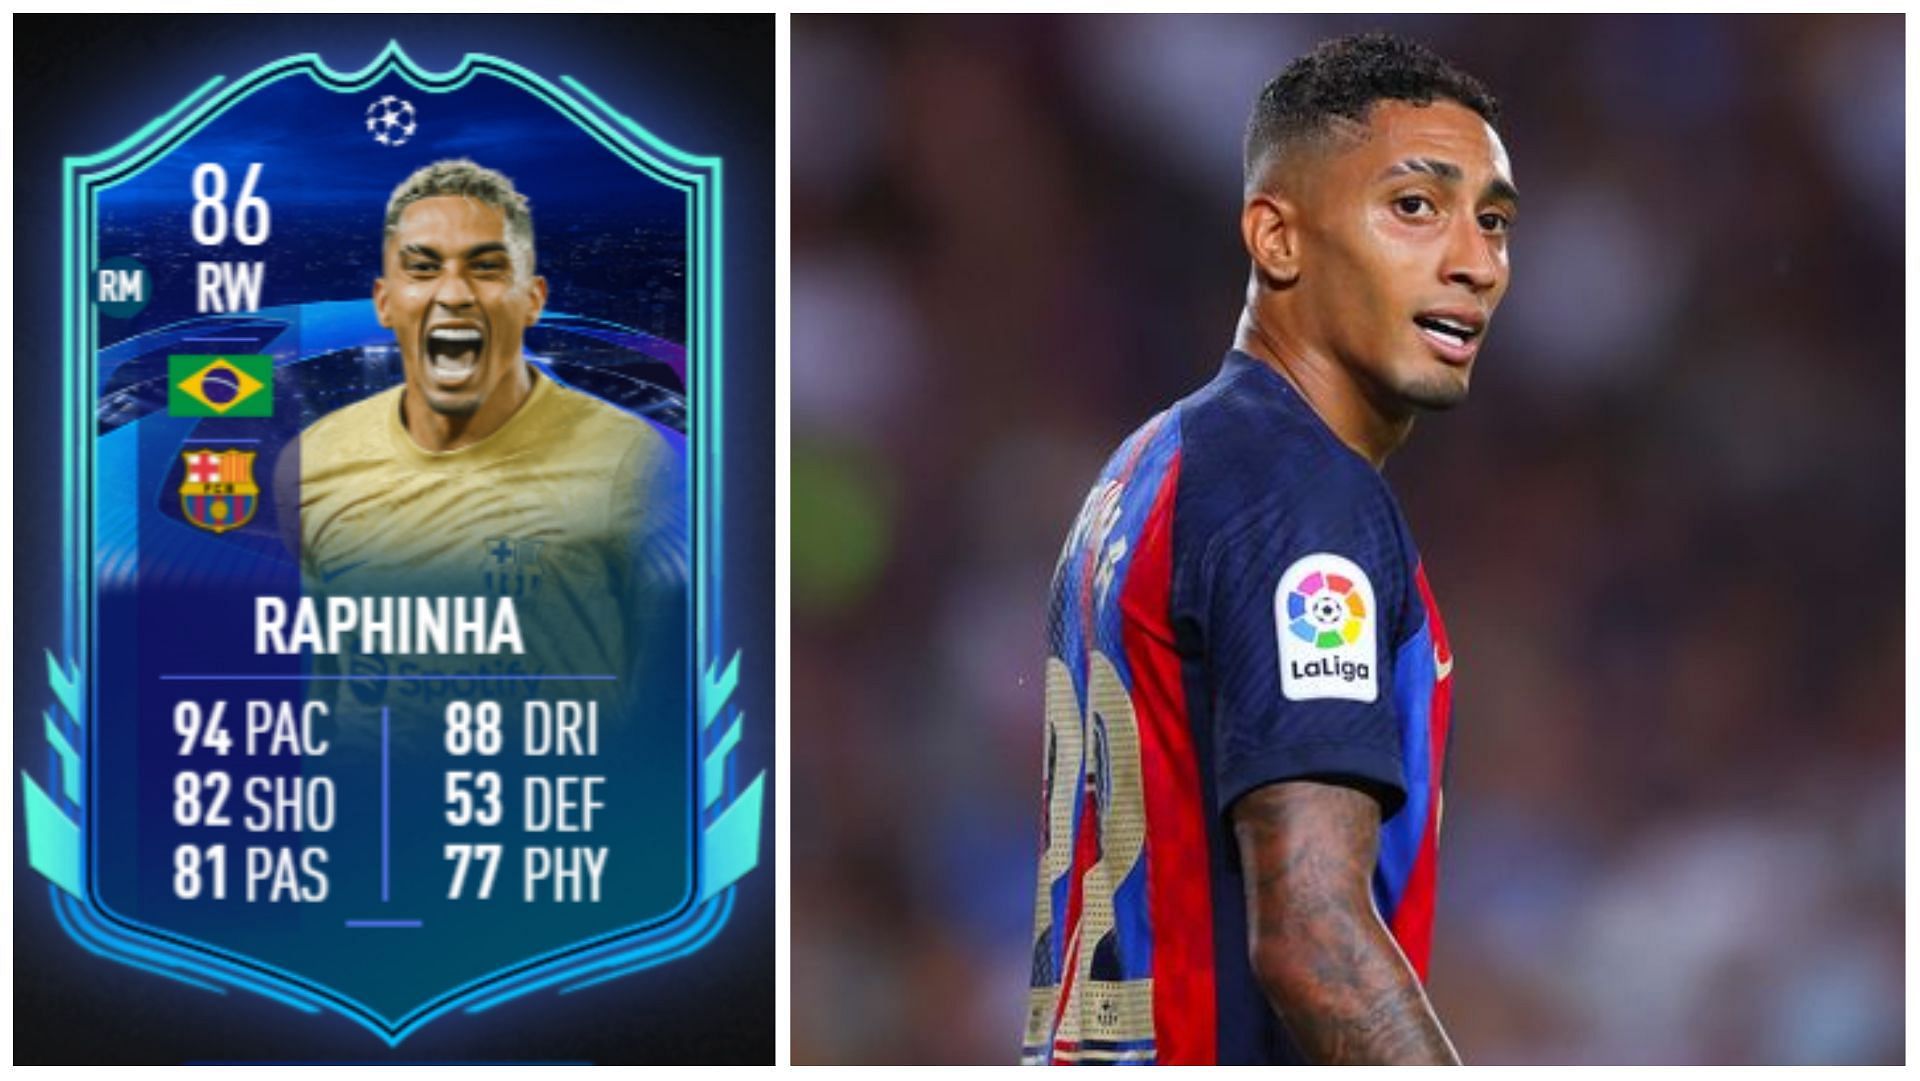 These cards are unlikely to receive any upgrades in FIFA 23 (Images via EA Sports and Getty Images)